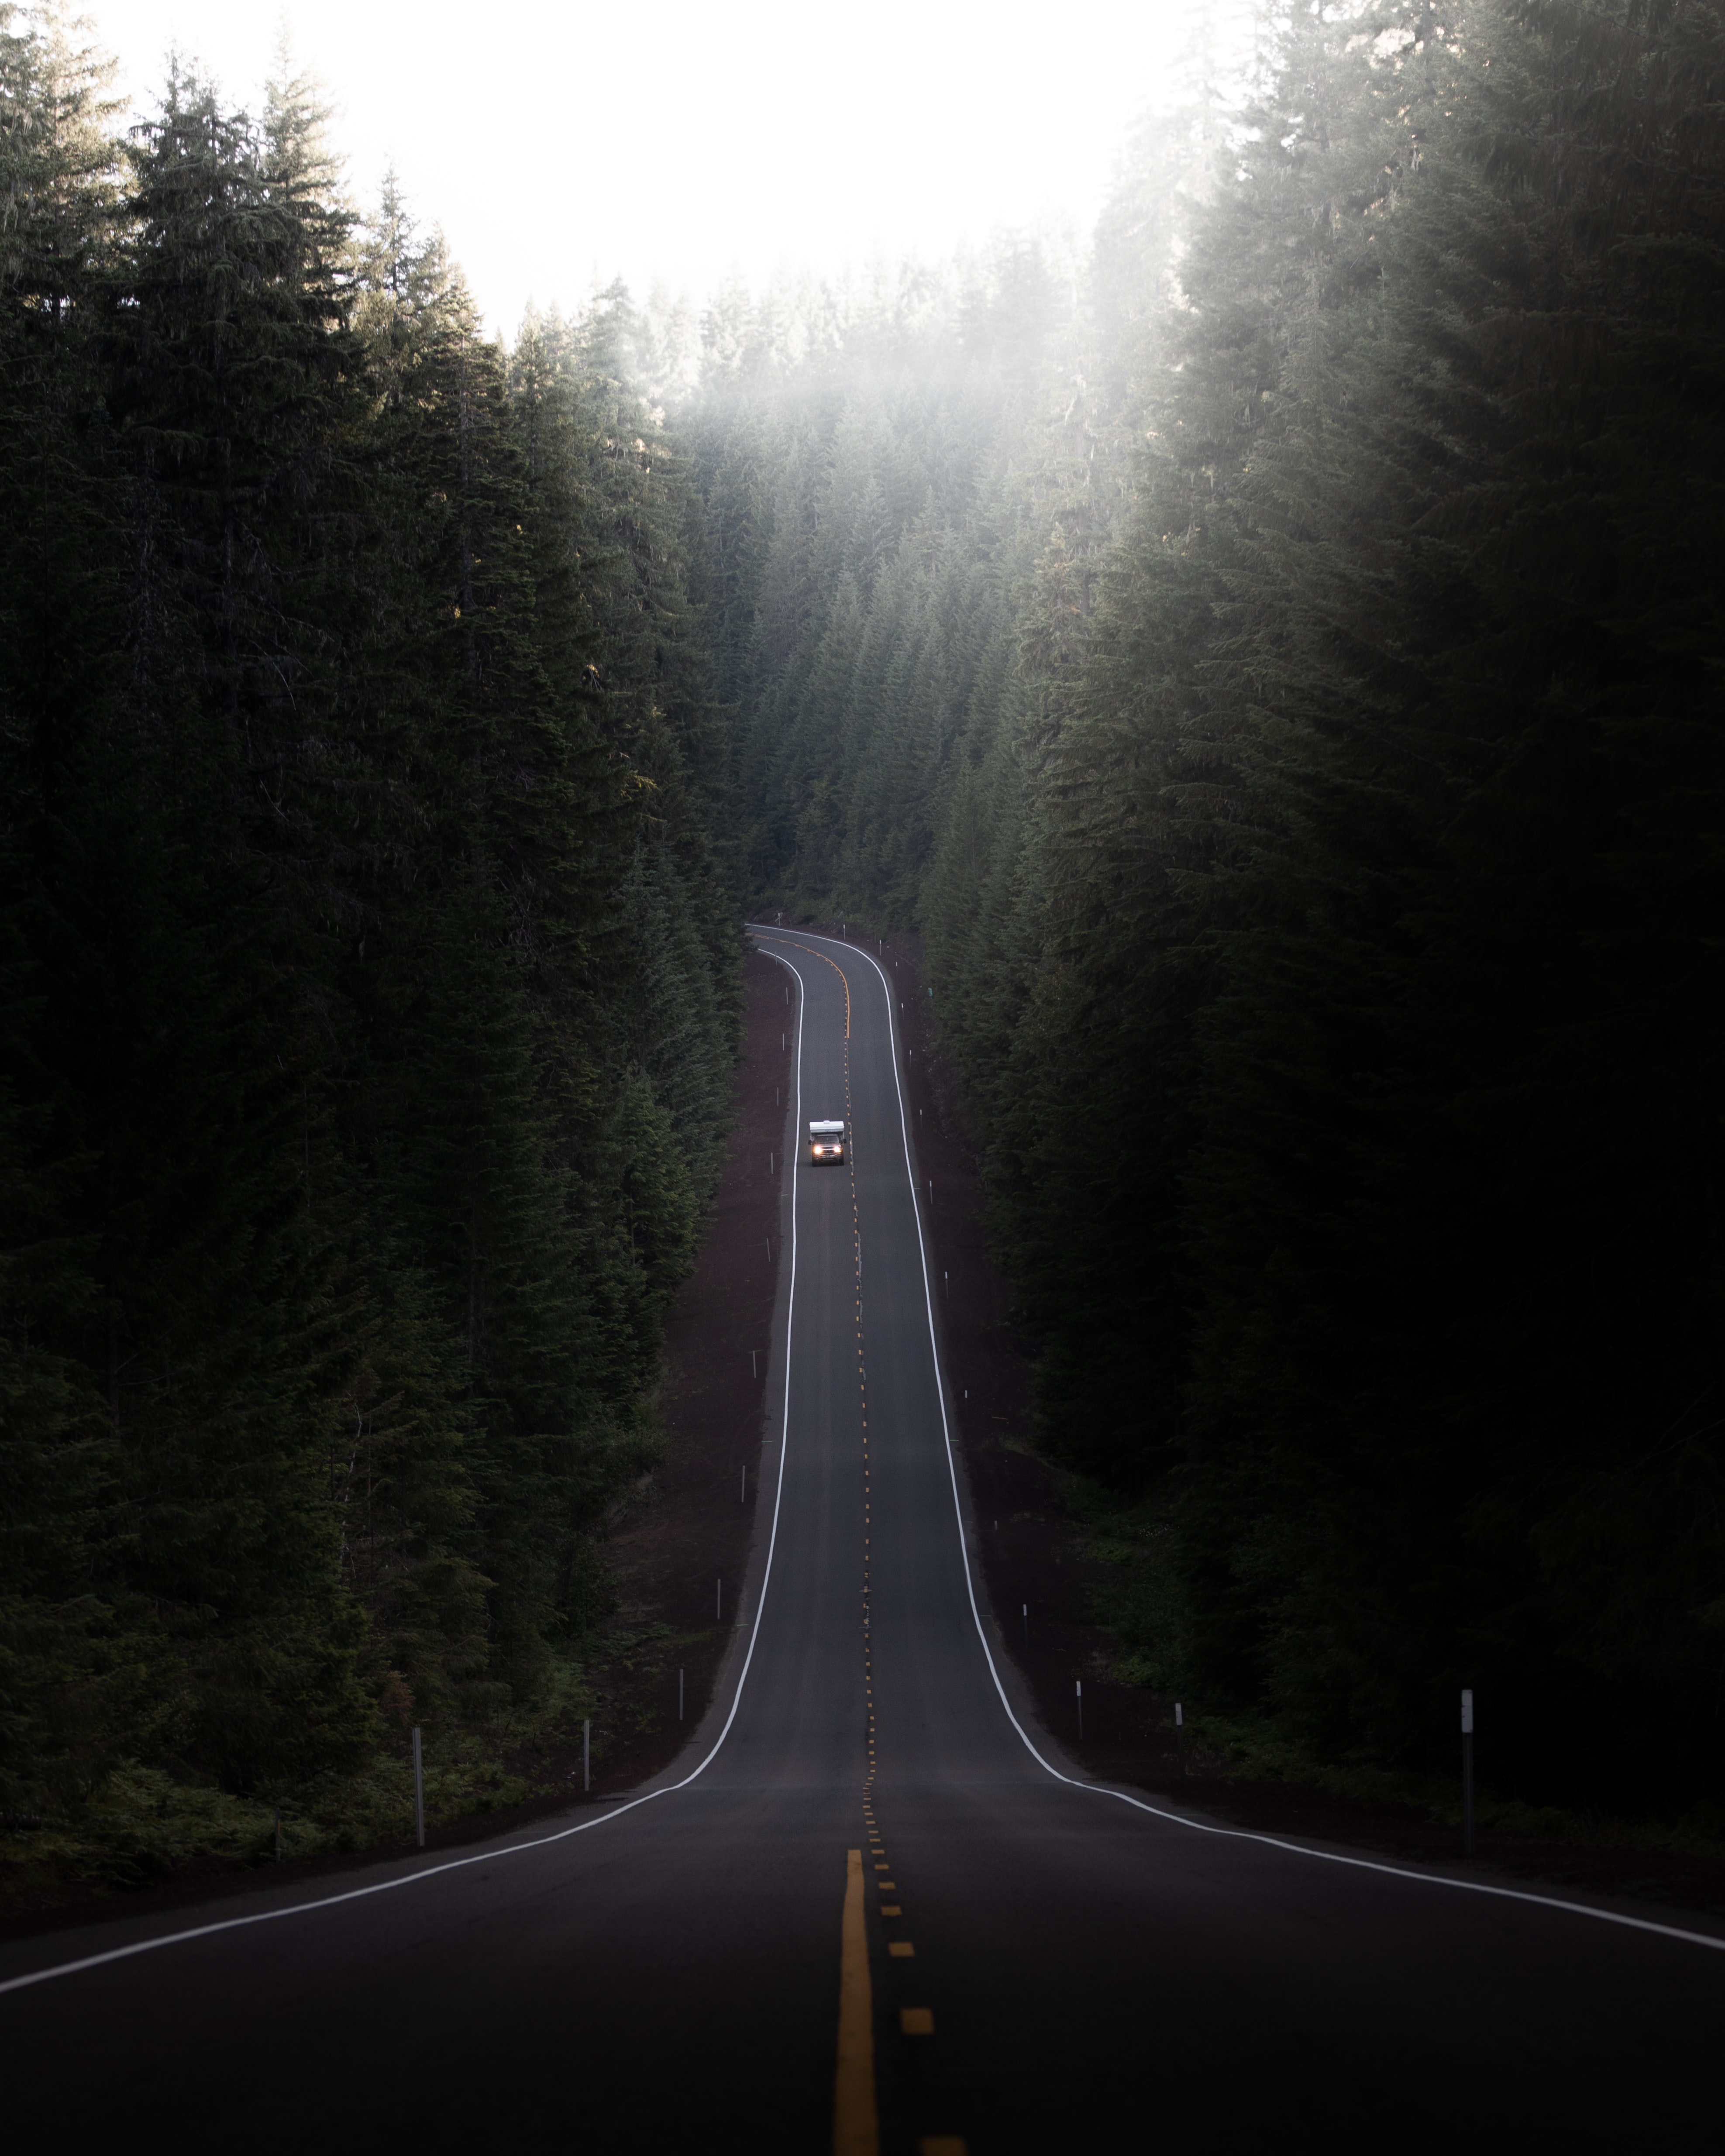 nature, trees, hill, car home screen for smartphone